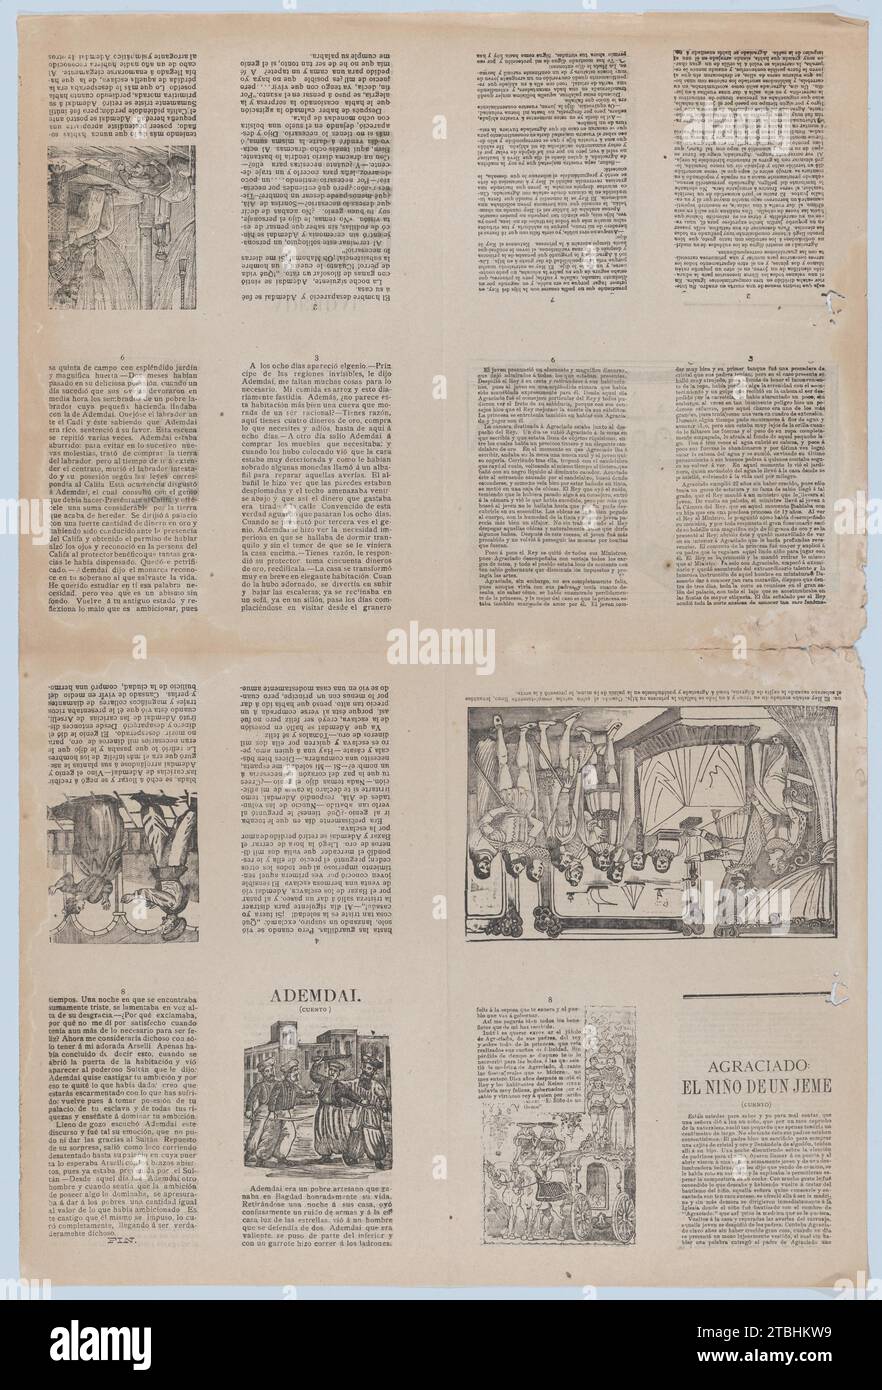 An uncut sheet printed on both sides with pages from 'Ademdai' and 'Agraciado: El nino de un jeme' 1946 by Jose Guadalupe Posada Stock Photo